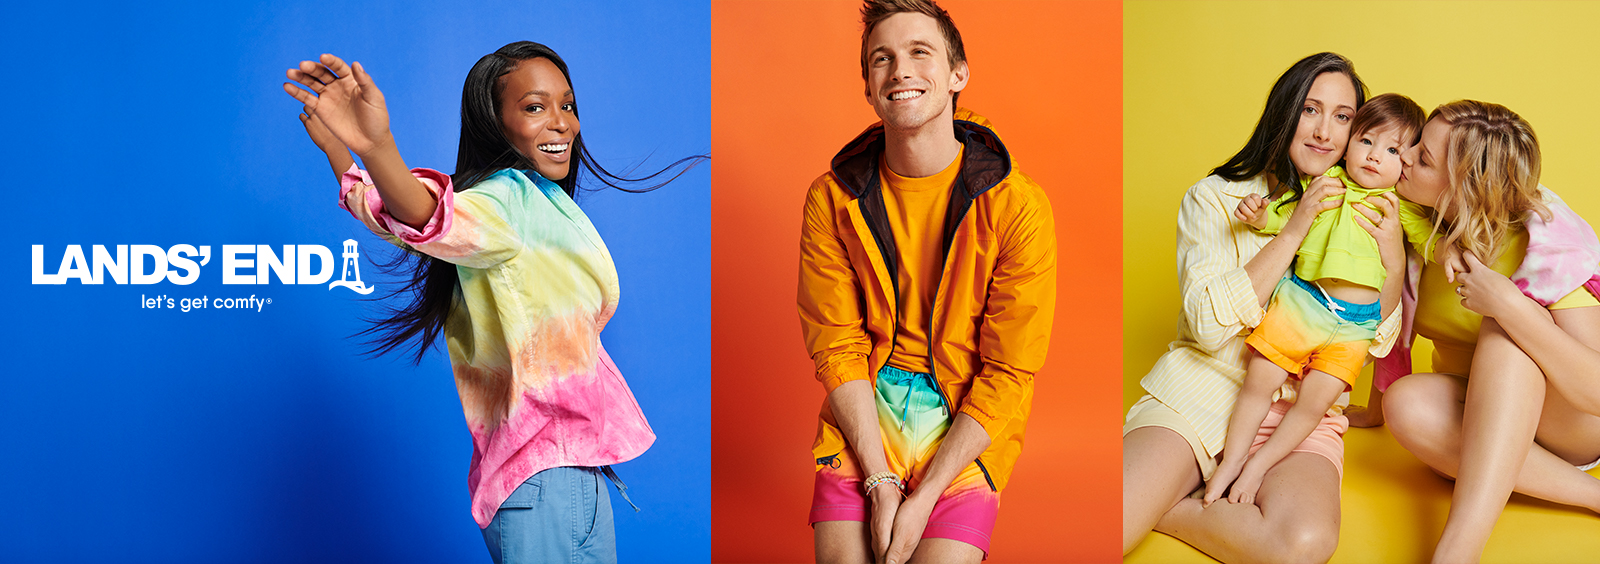 Playful Pride Outfits for Men